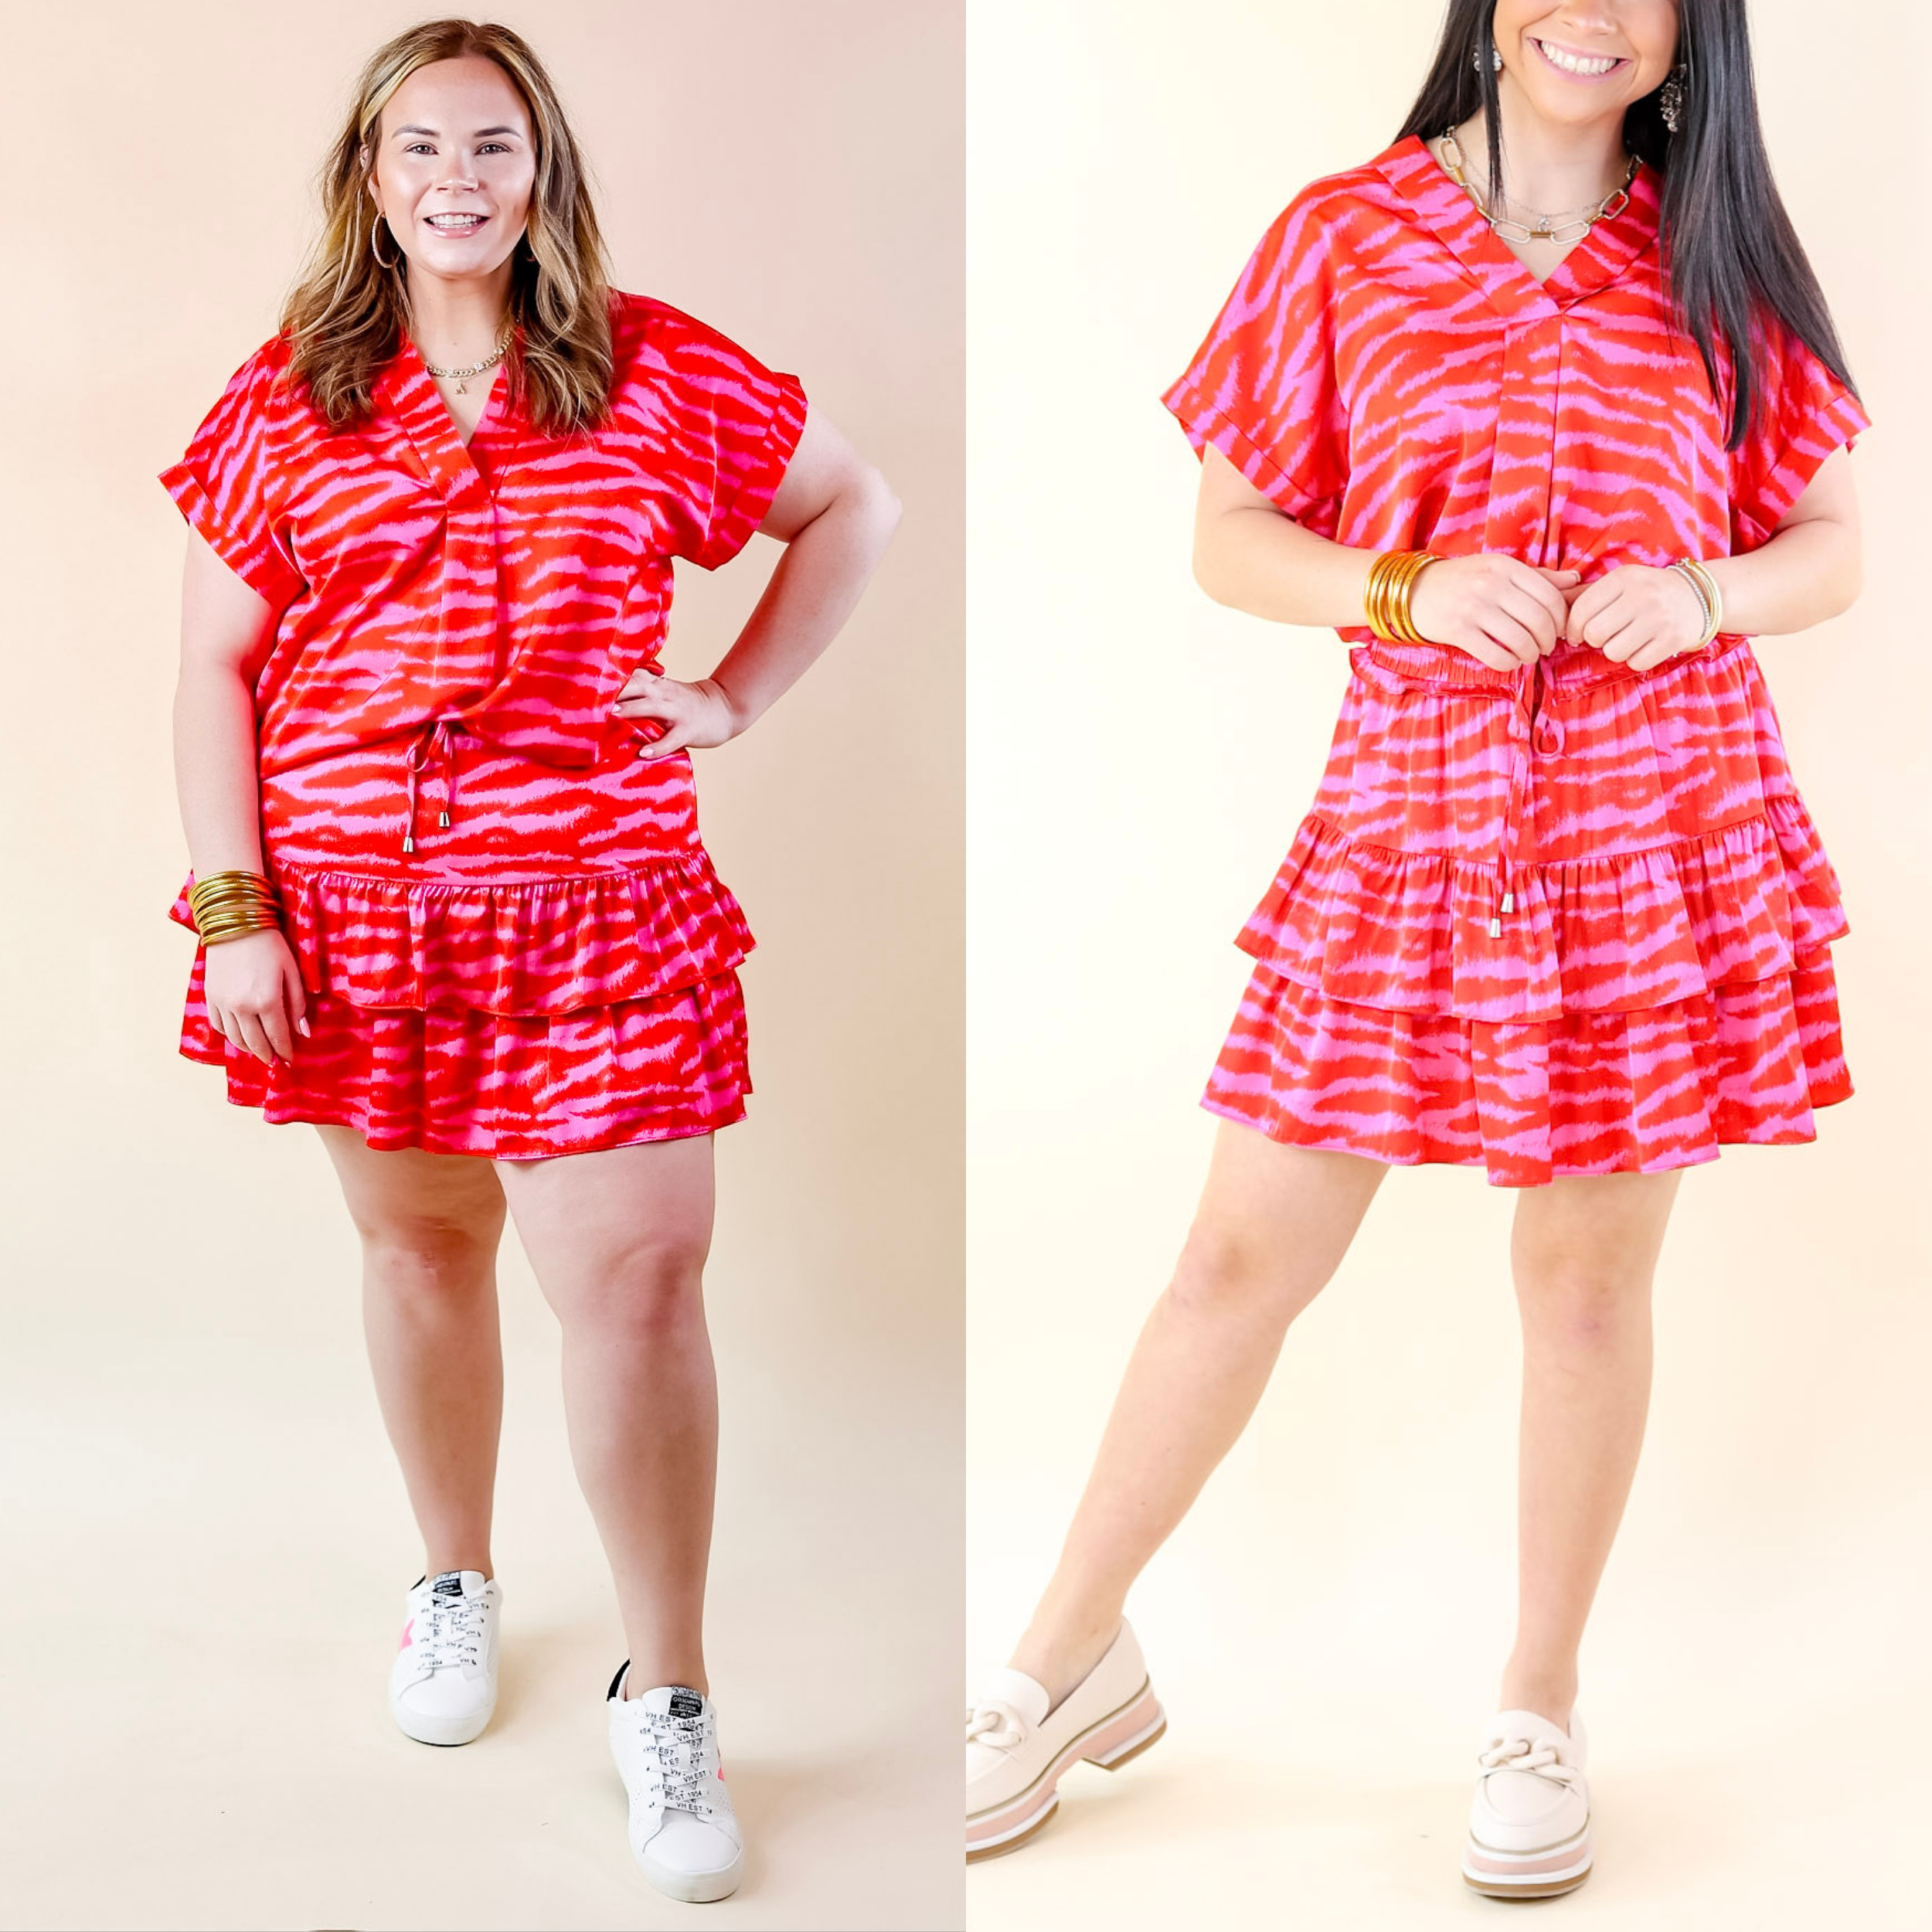 Vibrant Vibes Zebra Print Tiered Skort with Drawstring Waist in Red and Pink - Giddy Up Glamour Boutique